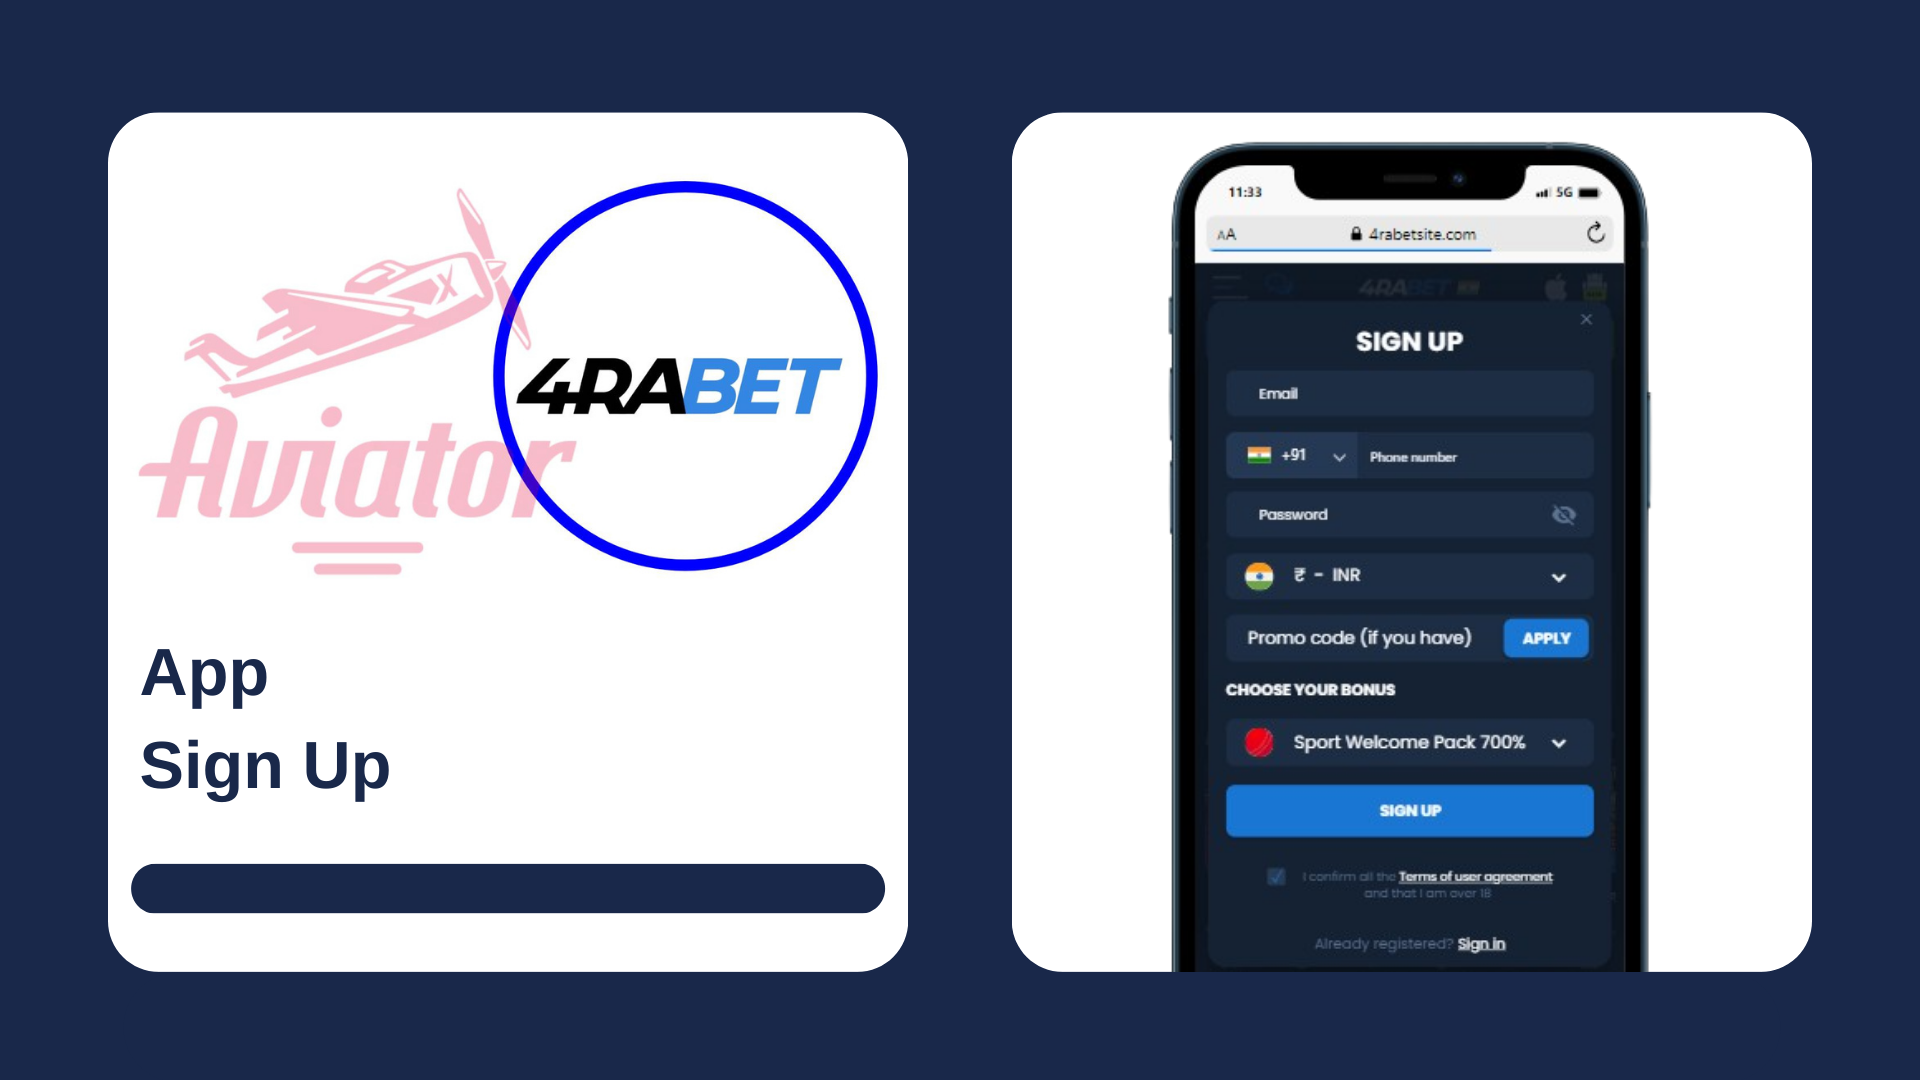 A smartphone showing sign up form of the casino, with Aviator game and 4rabet logos